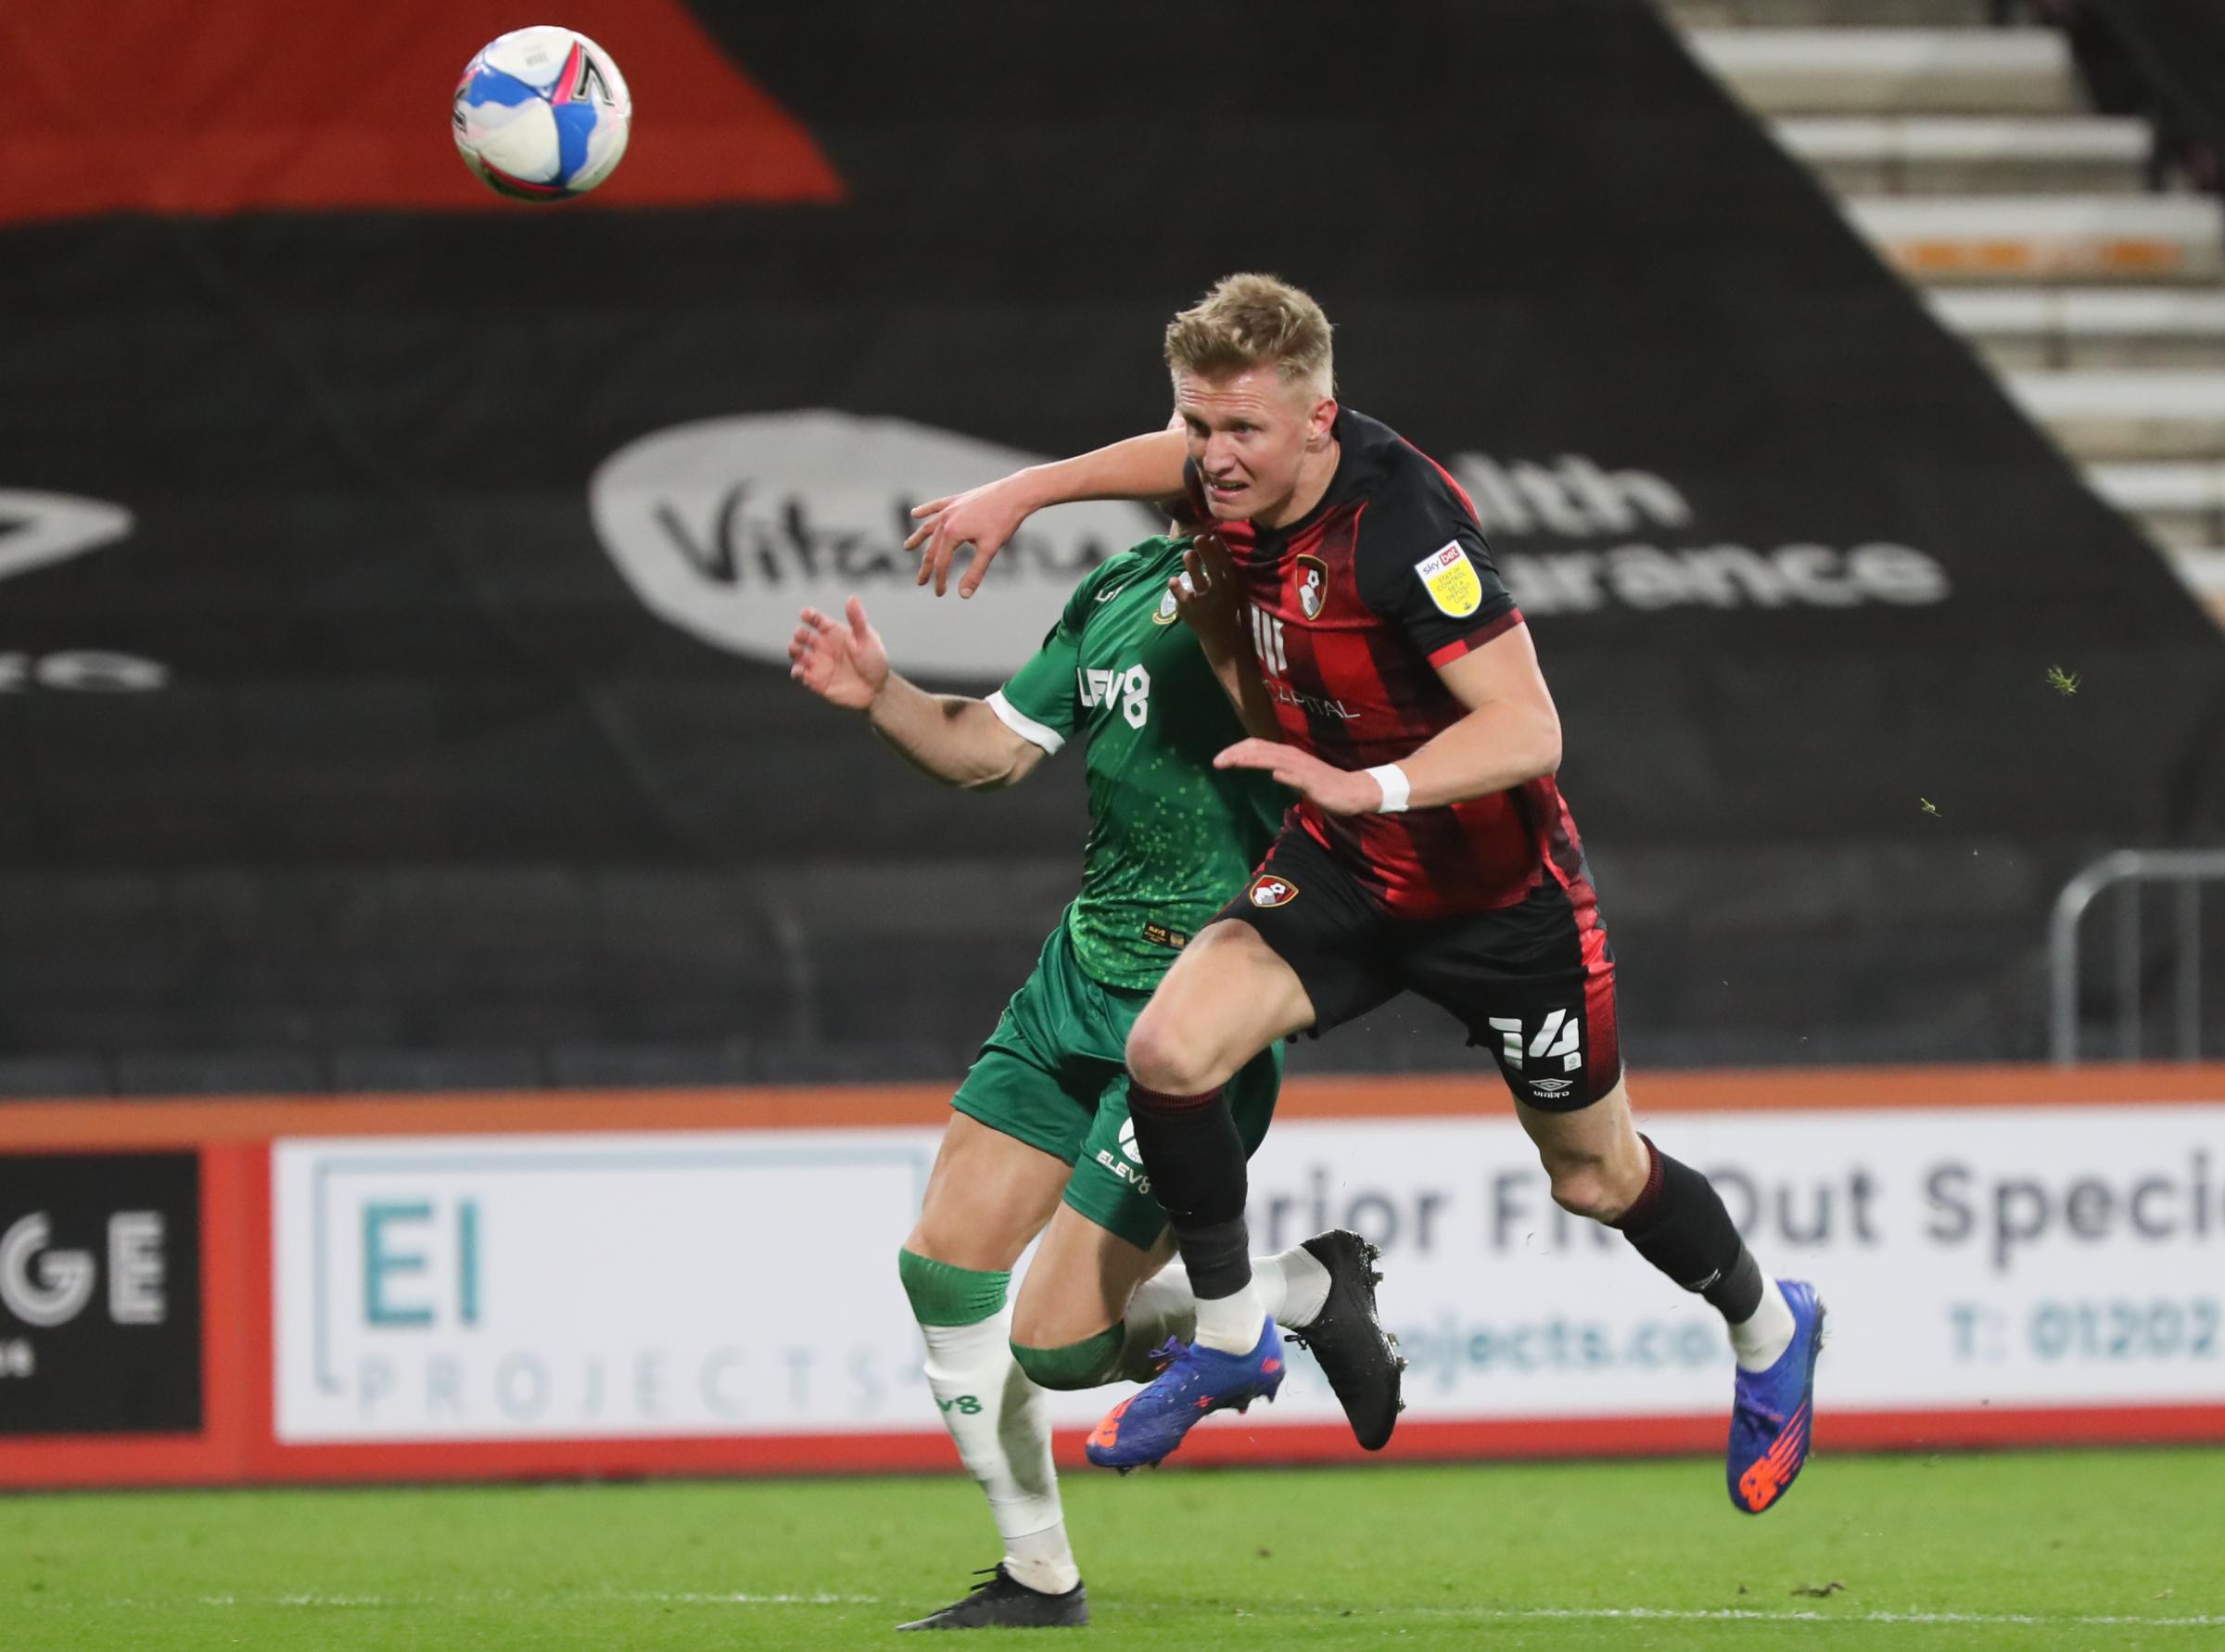 Surridge back in training with Cherries after toe problem